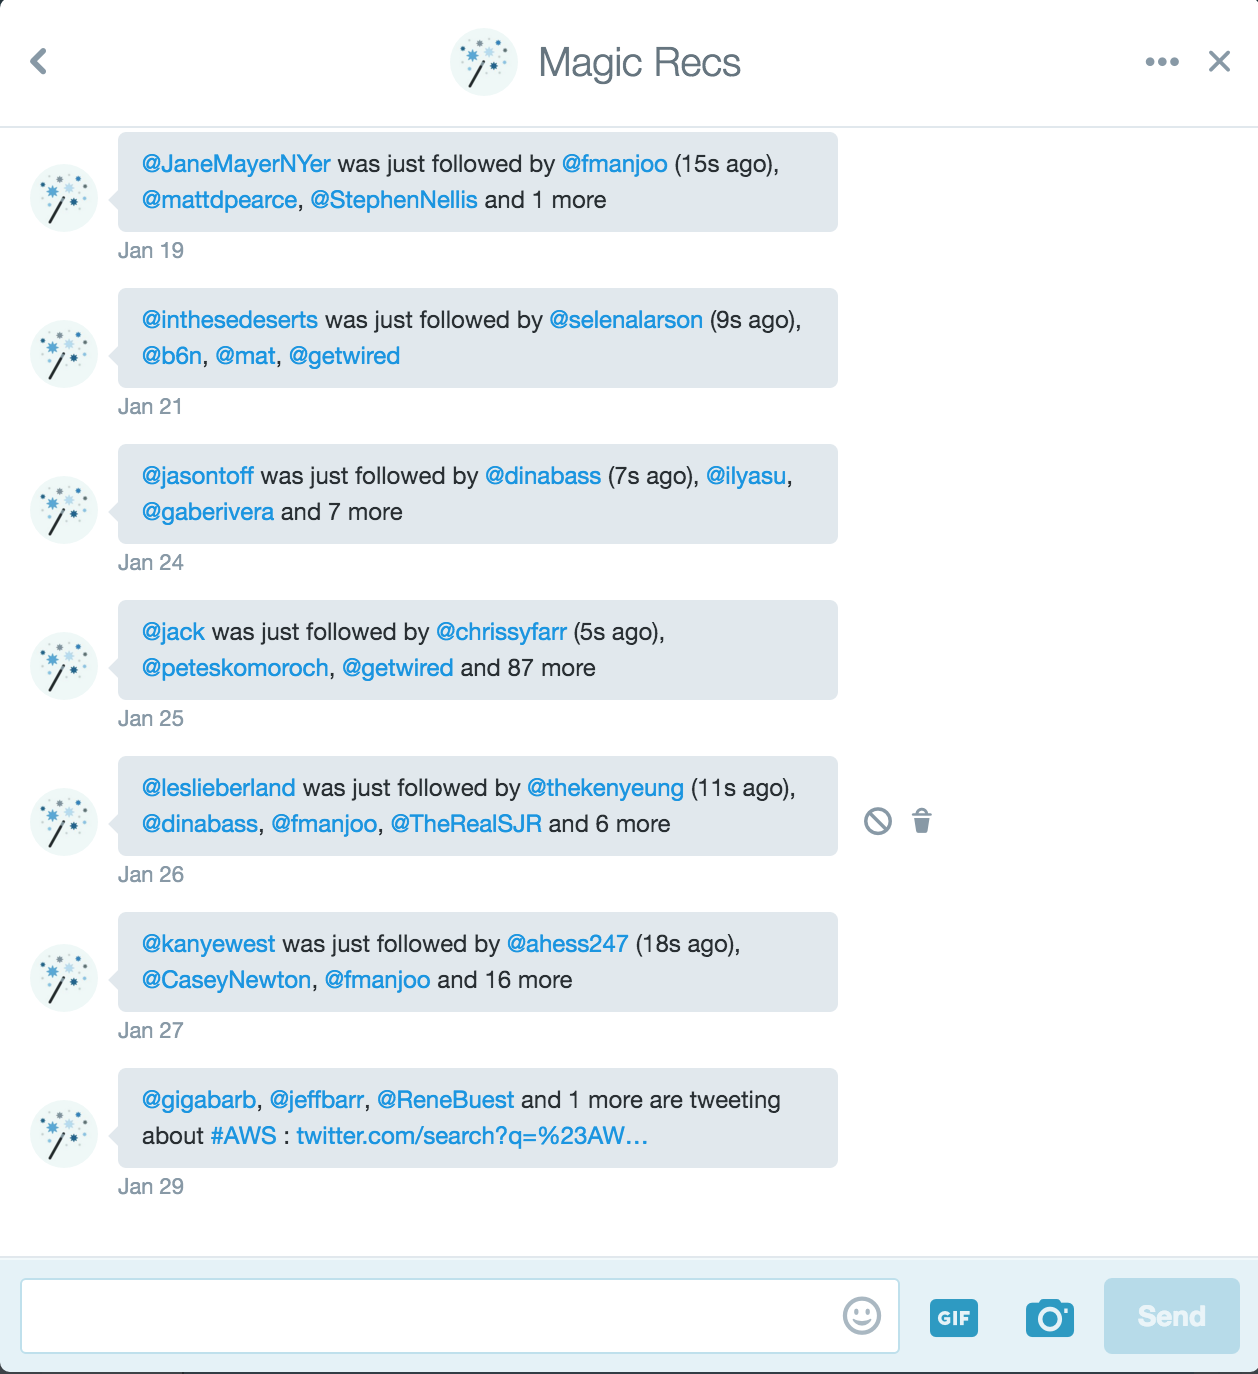 What Twitter's @MagicRecs account sends you by direct message.